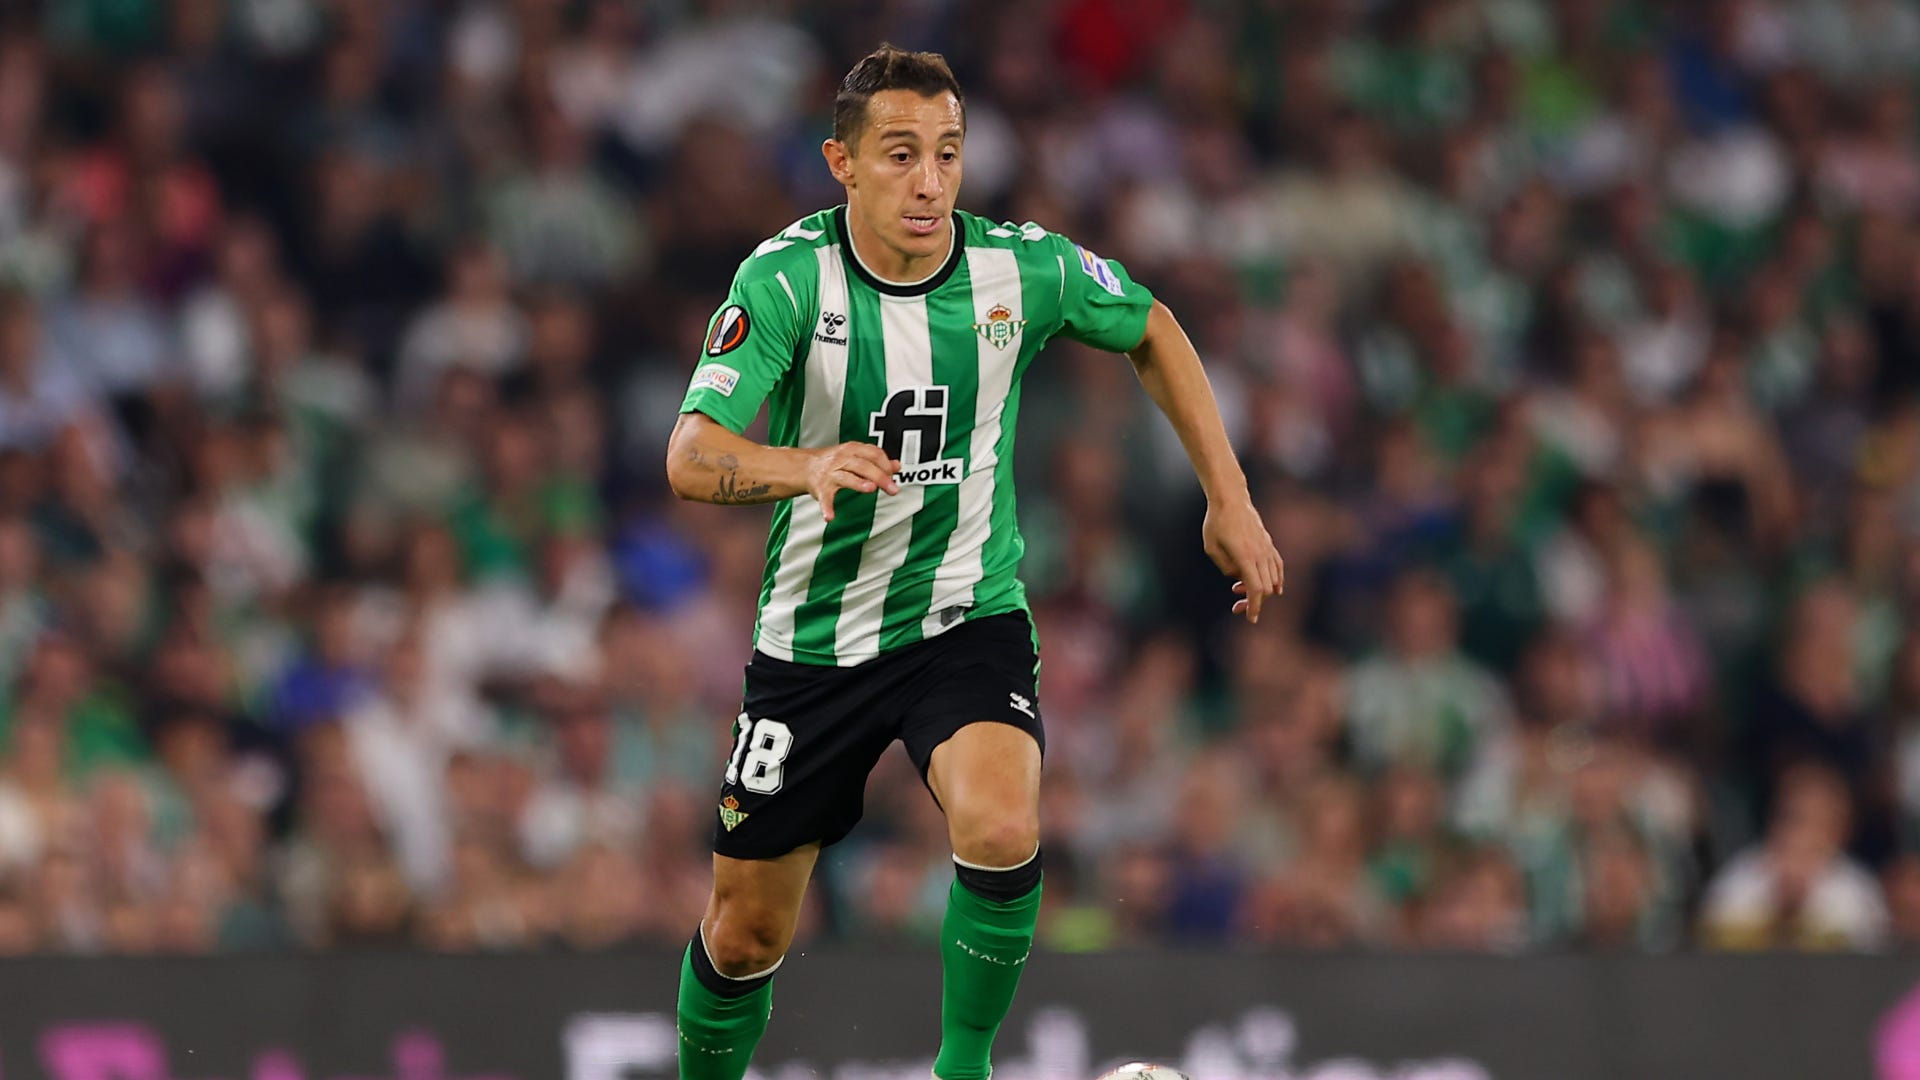 Cadiz vs Real Betis Live stream, TV channel, kick-off time and how to watch Goal